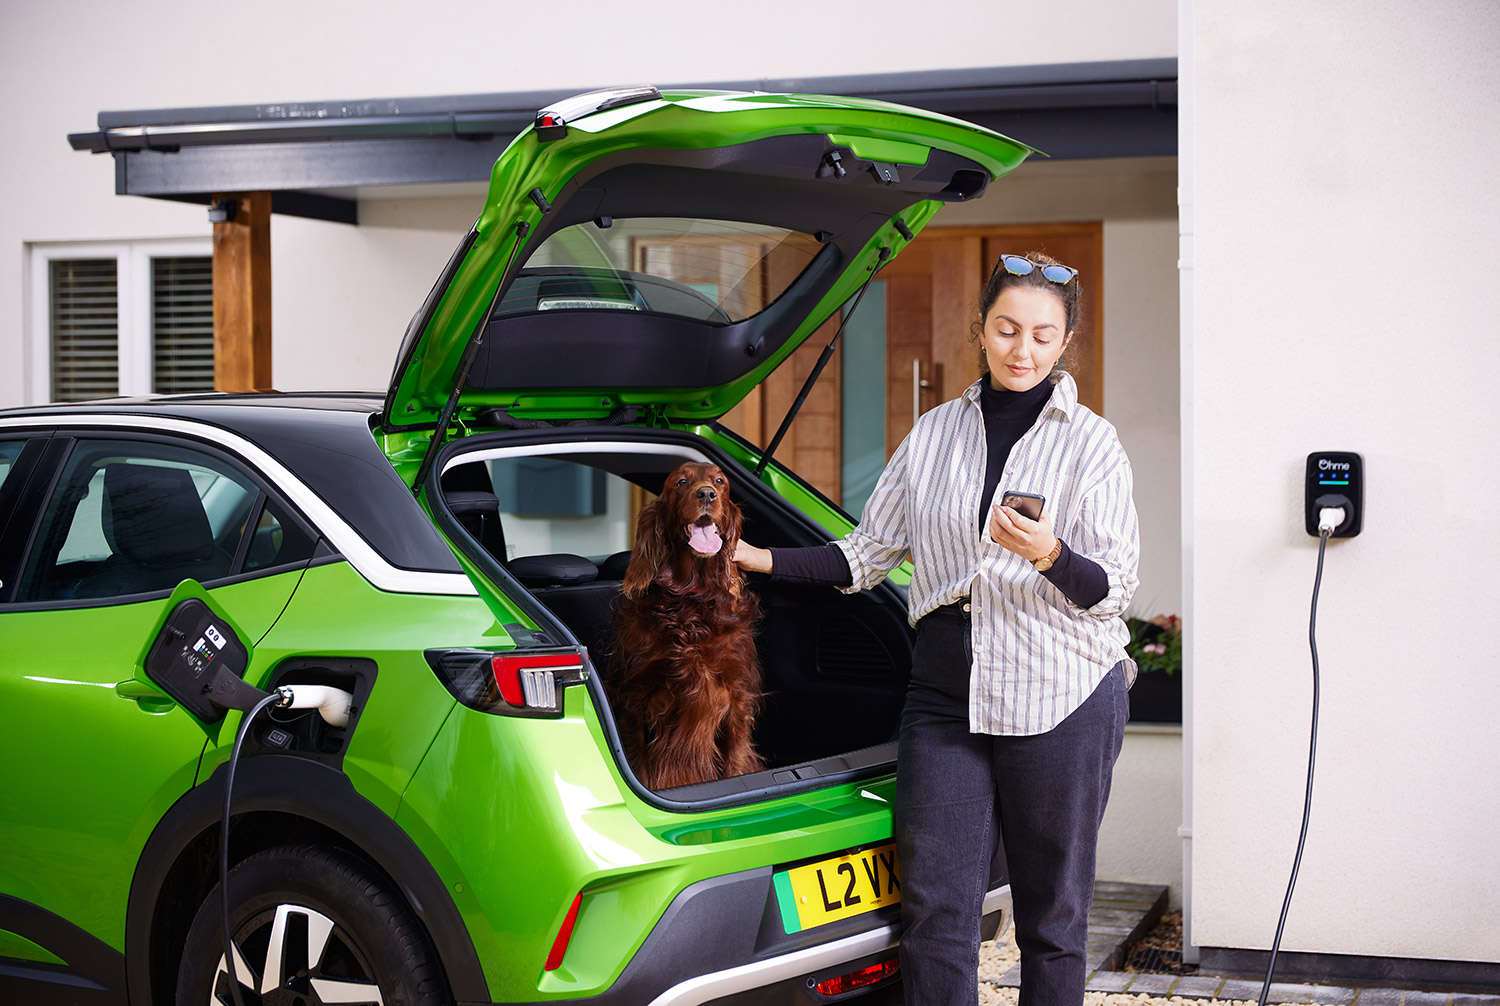 Green Vauxhall Mokka EV being charged with lady and red setter